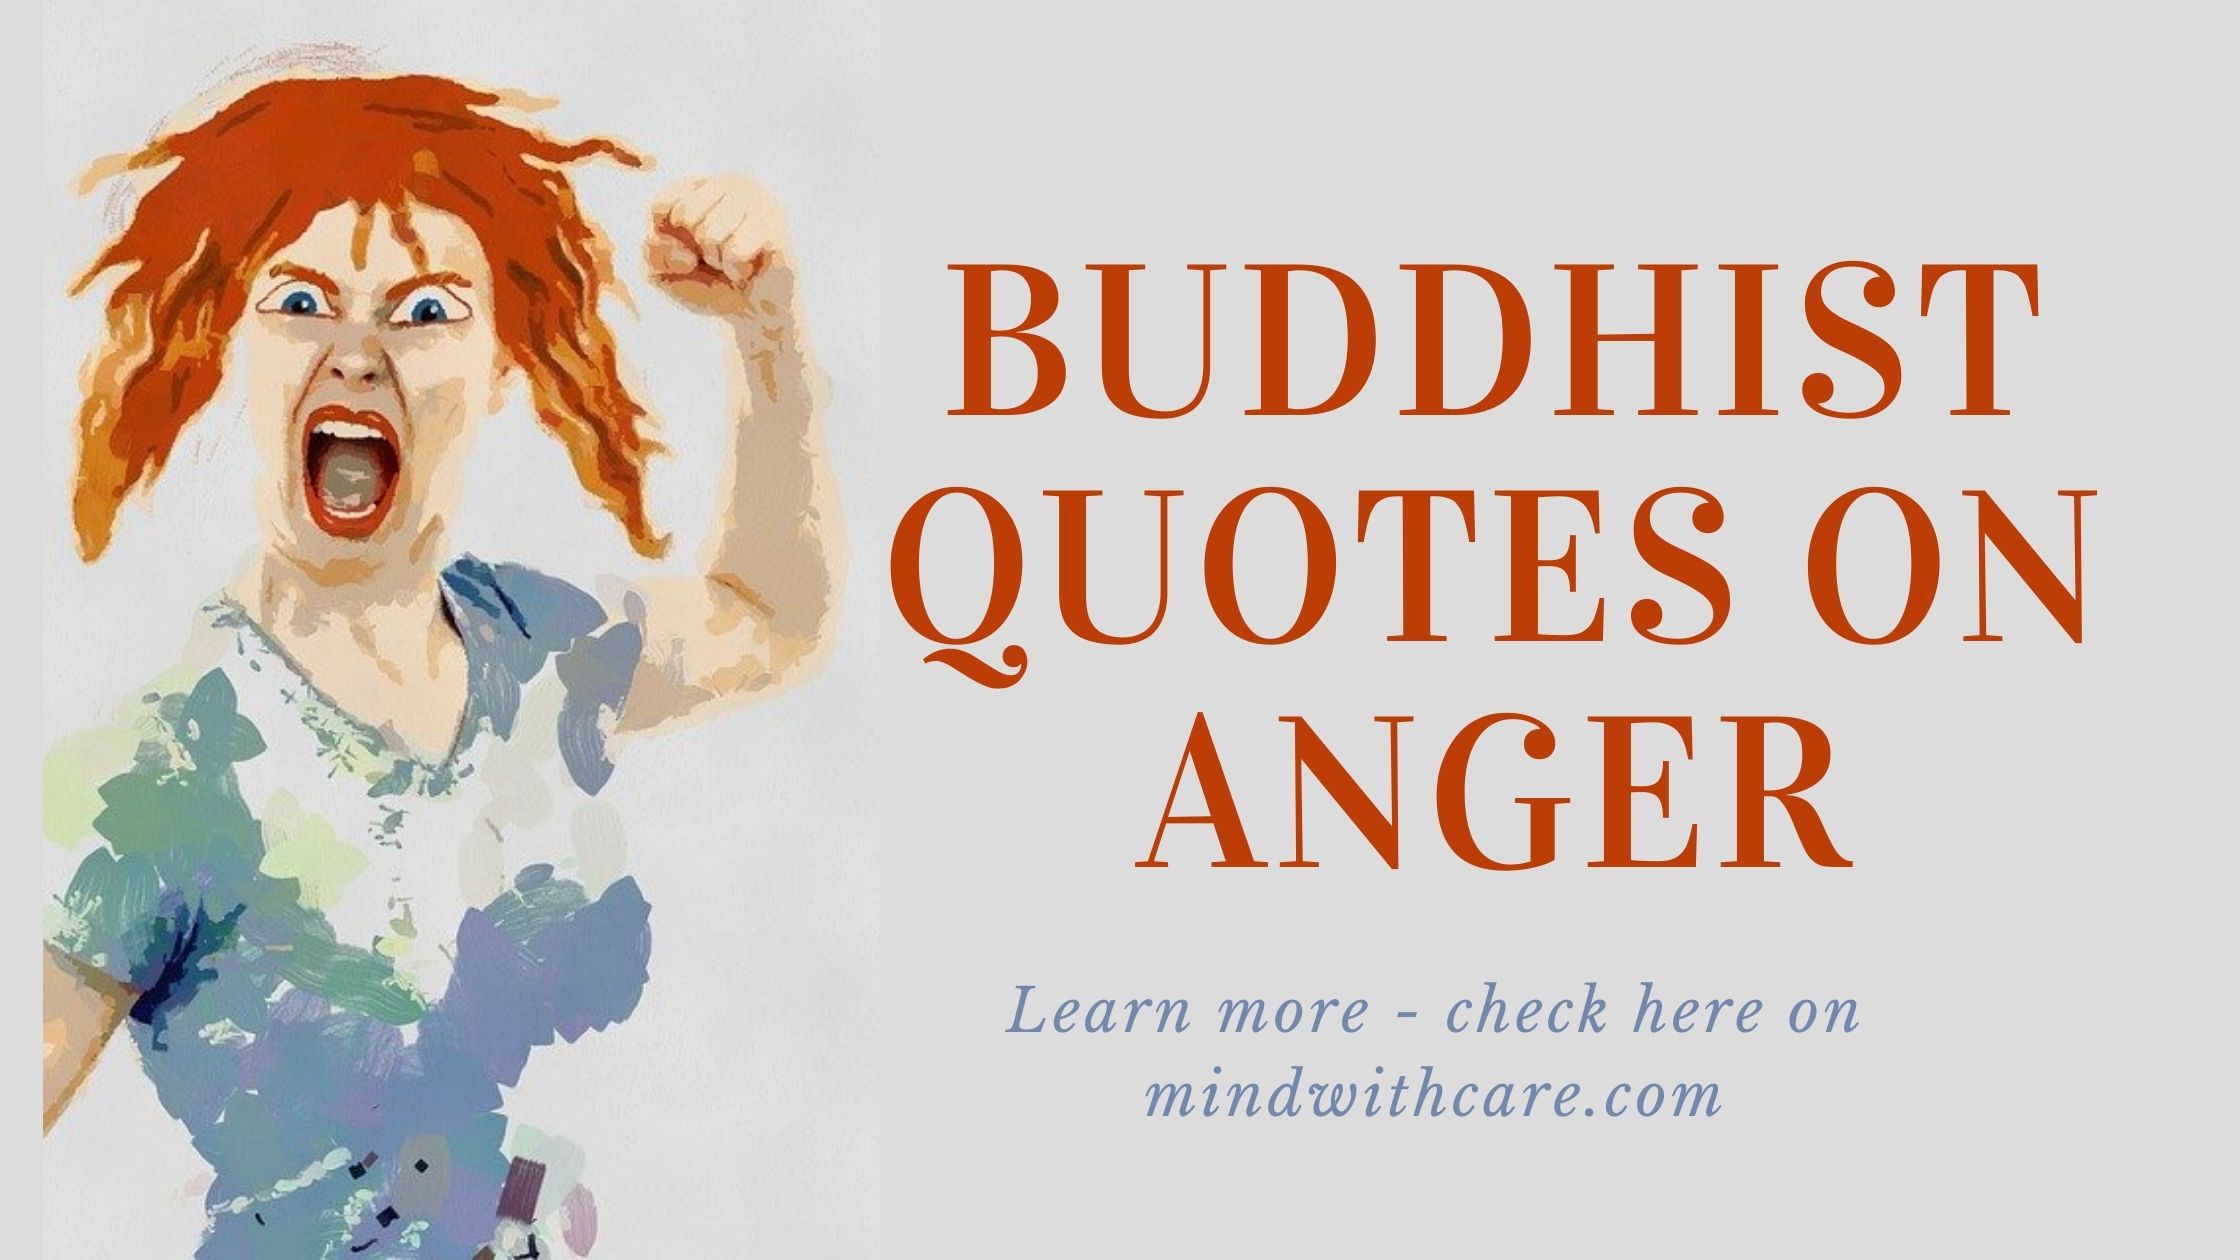 20 Buddhist quotes on anger - Mind with care